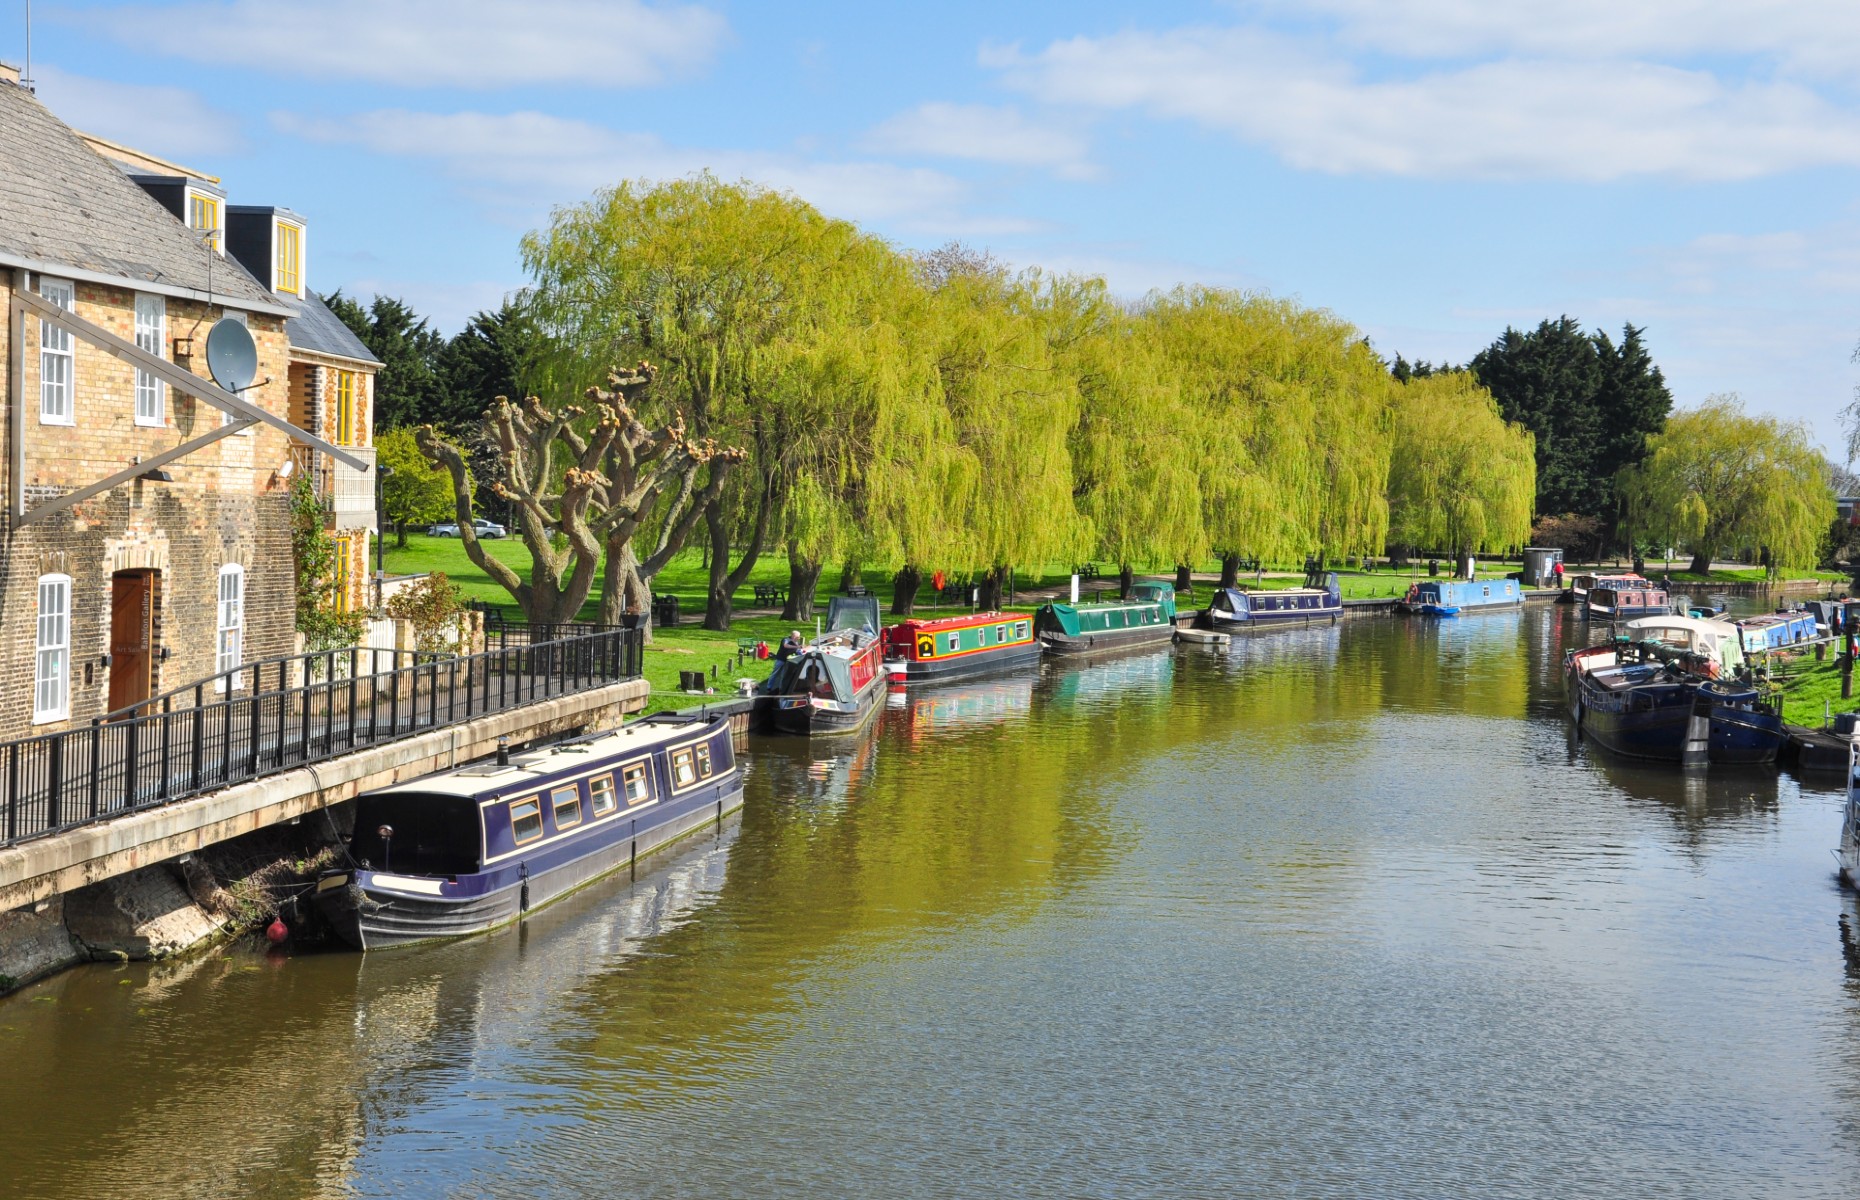 Narrow boats in Ely (Image: Peter Moulton/Shutterstock)